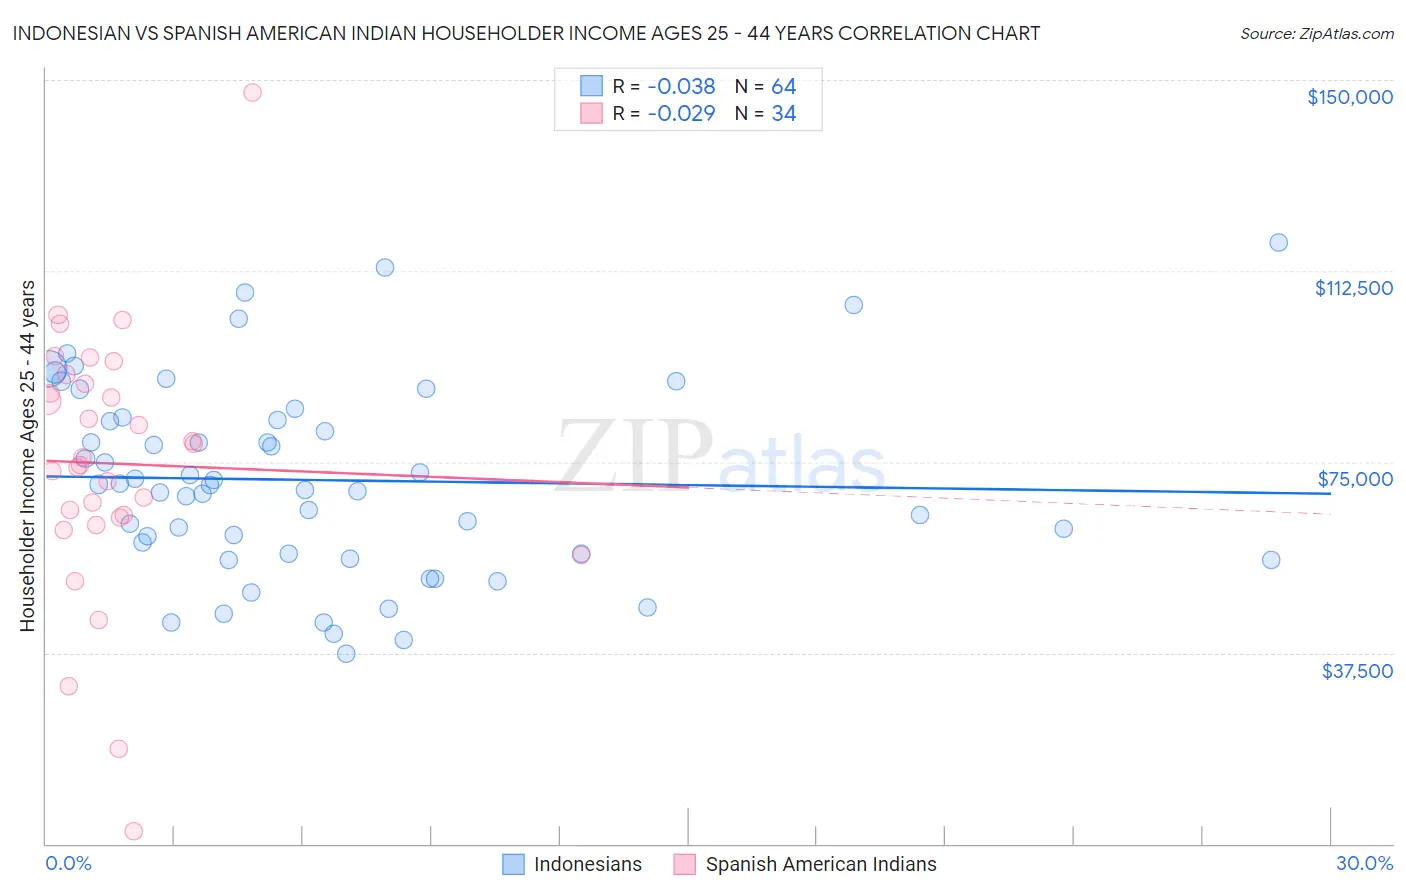 Indonesian vs Spanish American Indian Householder Income Ages 25 - 44 years